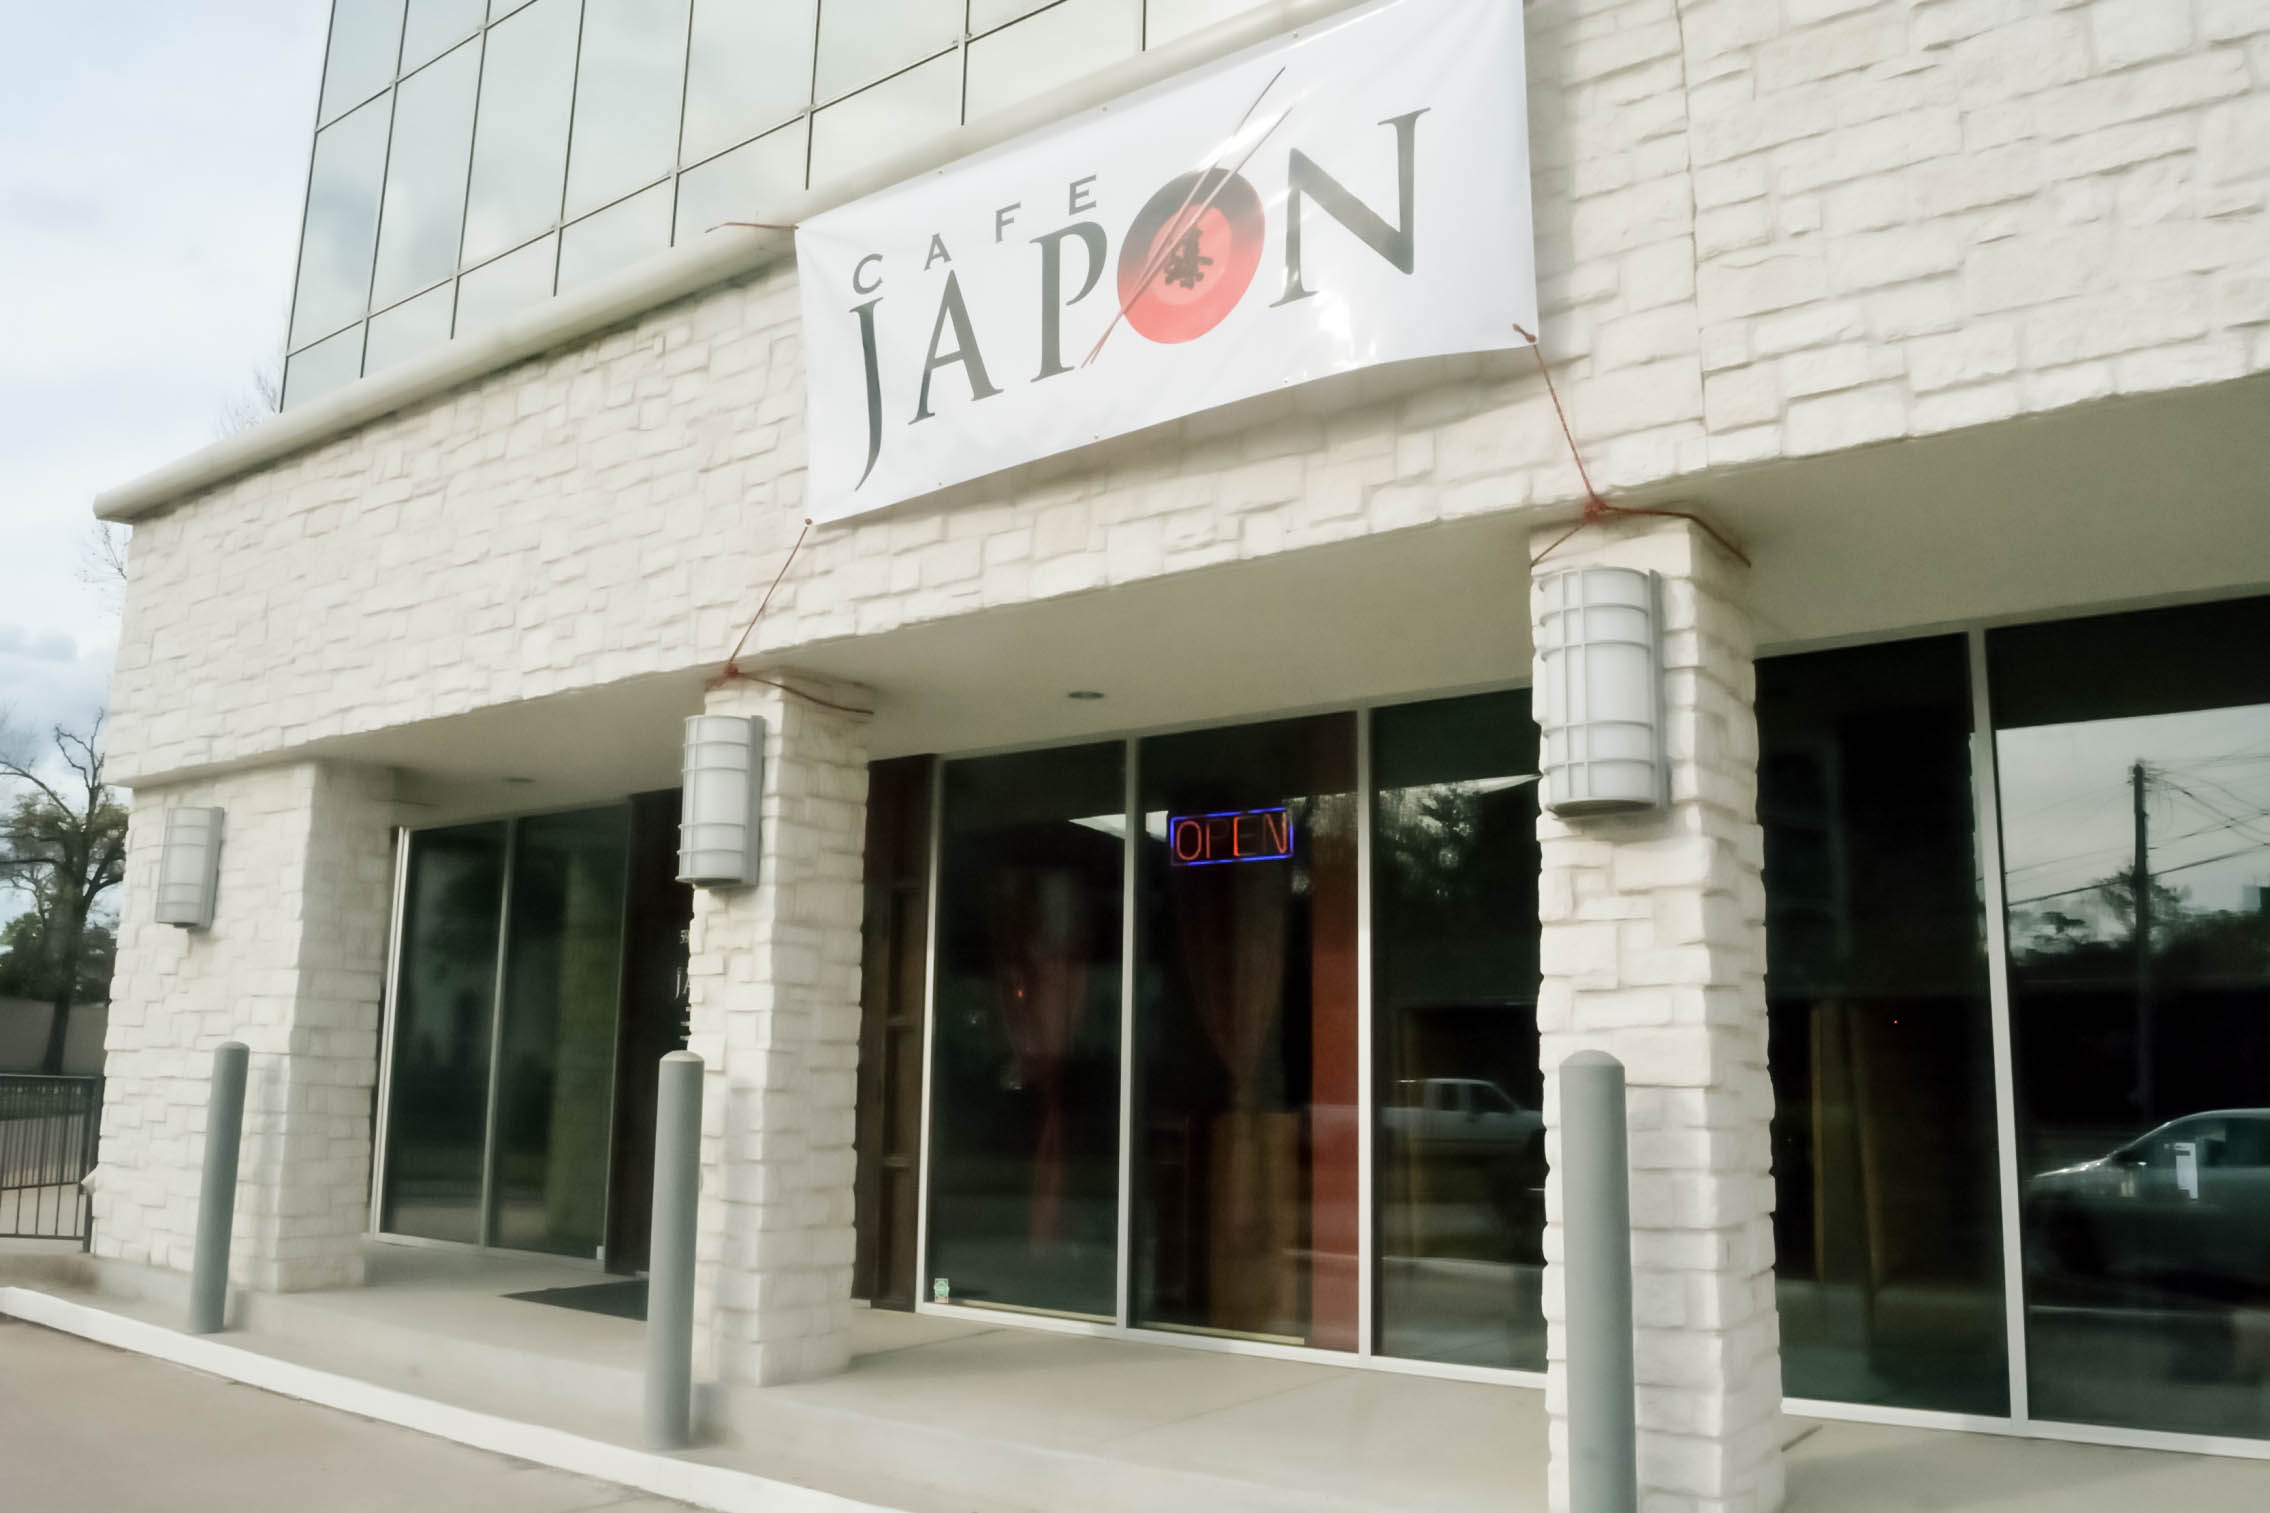 Cafe Japon returns, taking over a vacated sushi restaurant on Memorial.